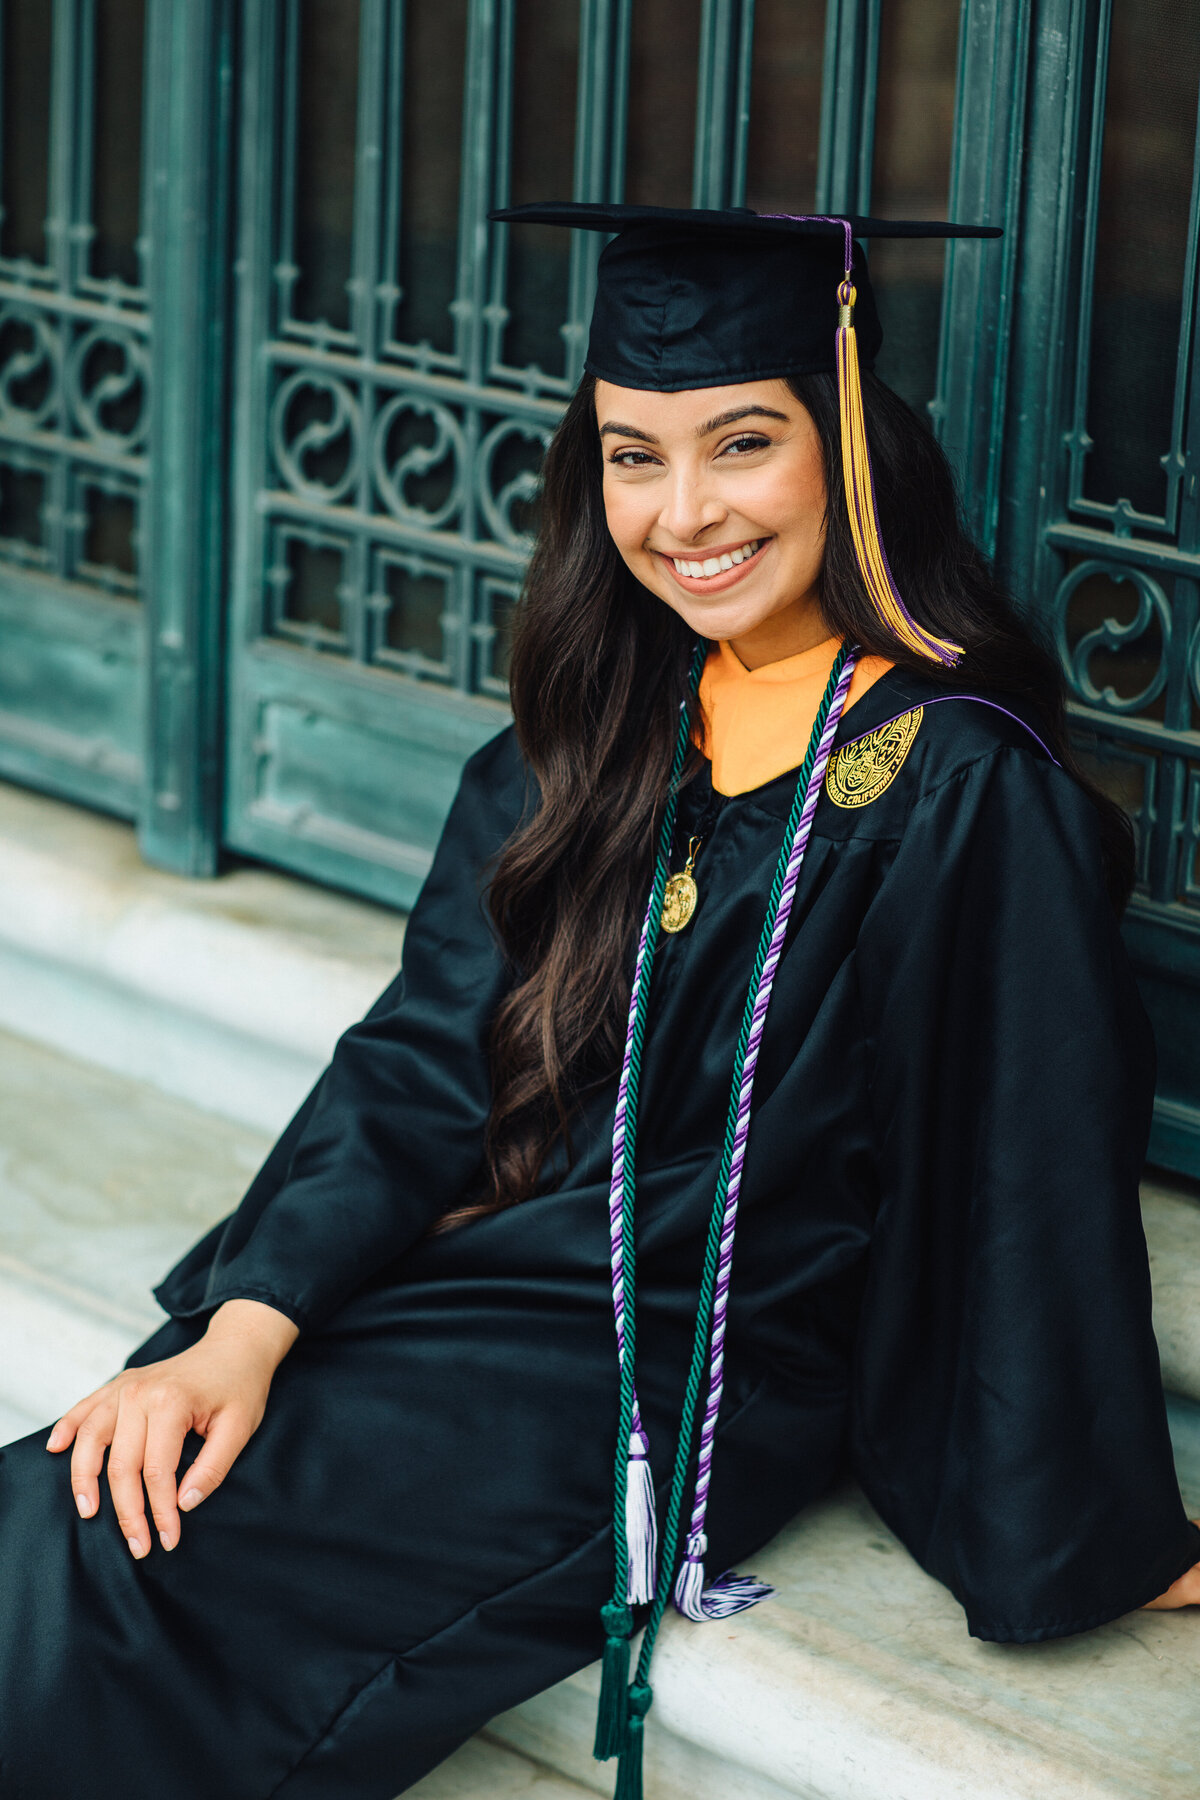 Graduation Portrait Of Young Woman In Black Toga Sitting  On a Cement Ground Los Angeles